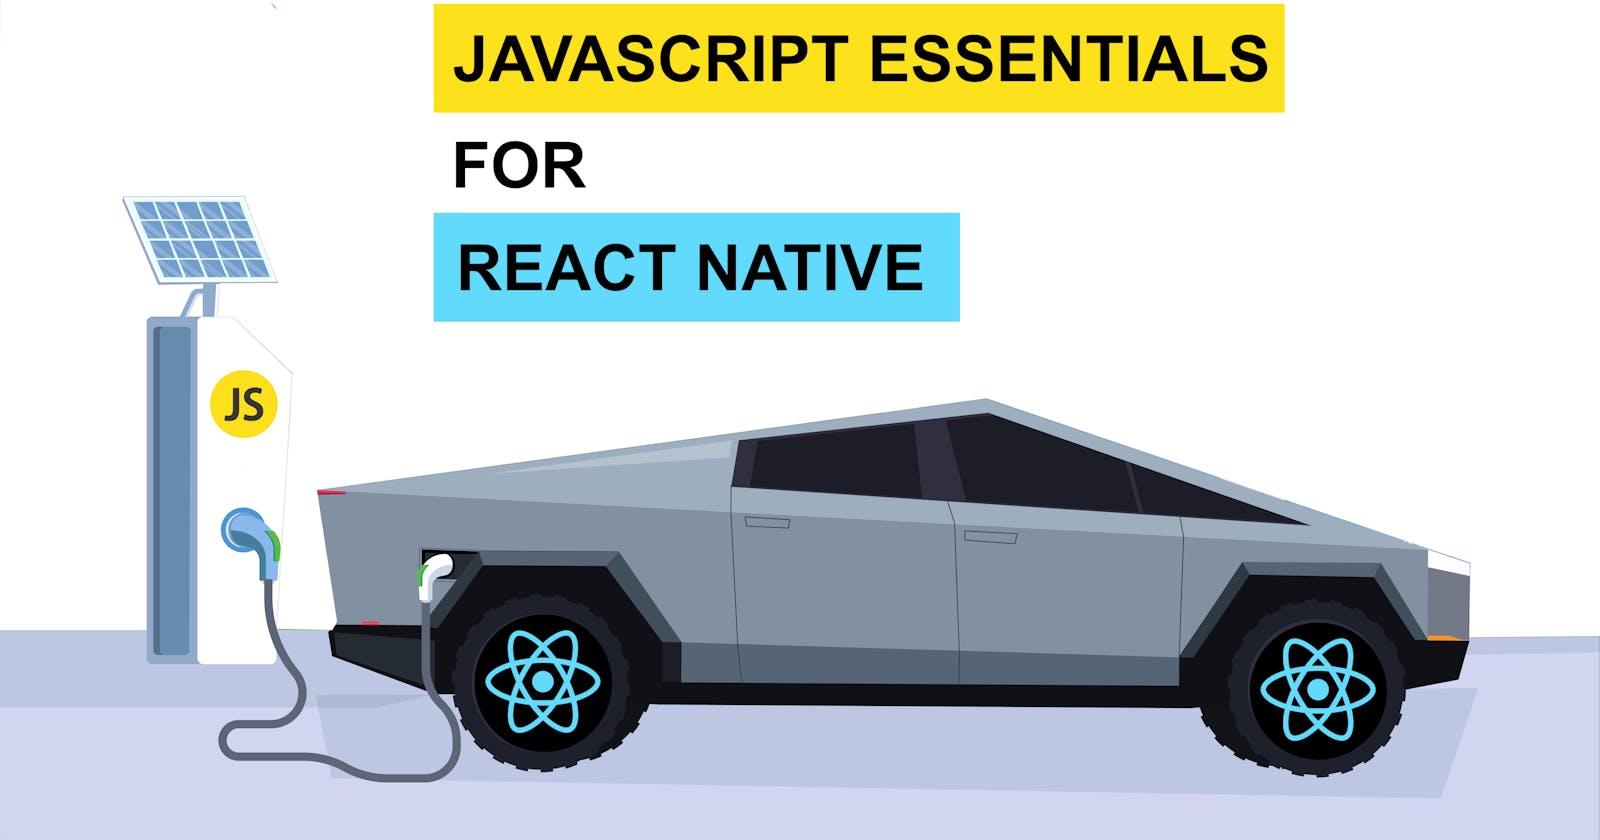 JavaScript Essentials for React Native - SERIES